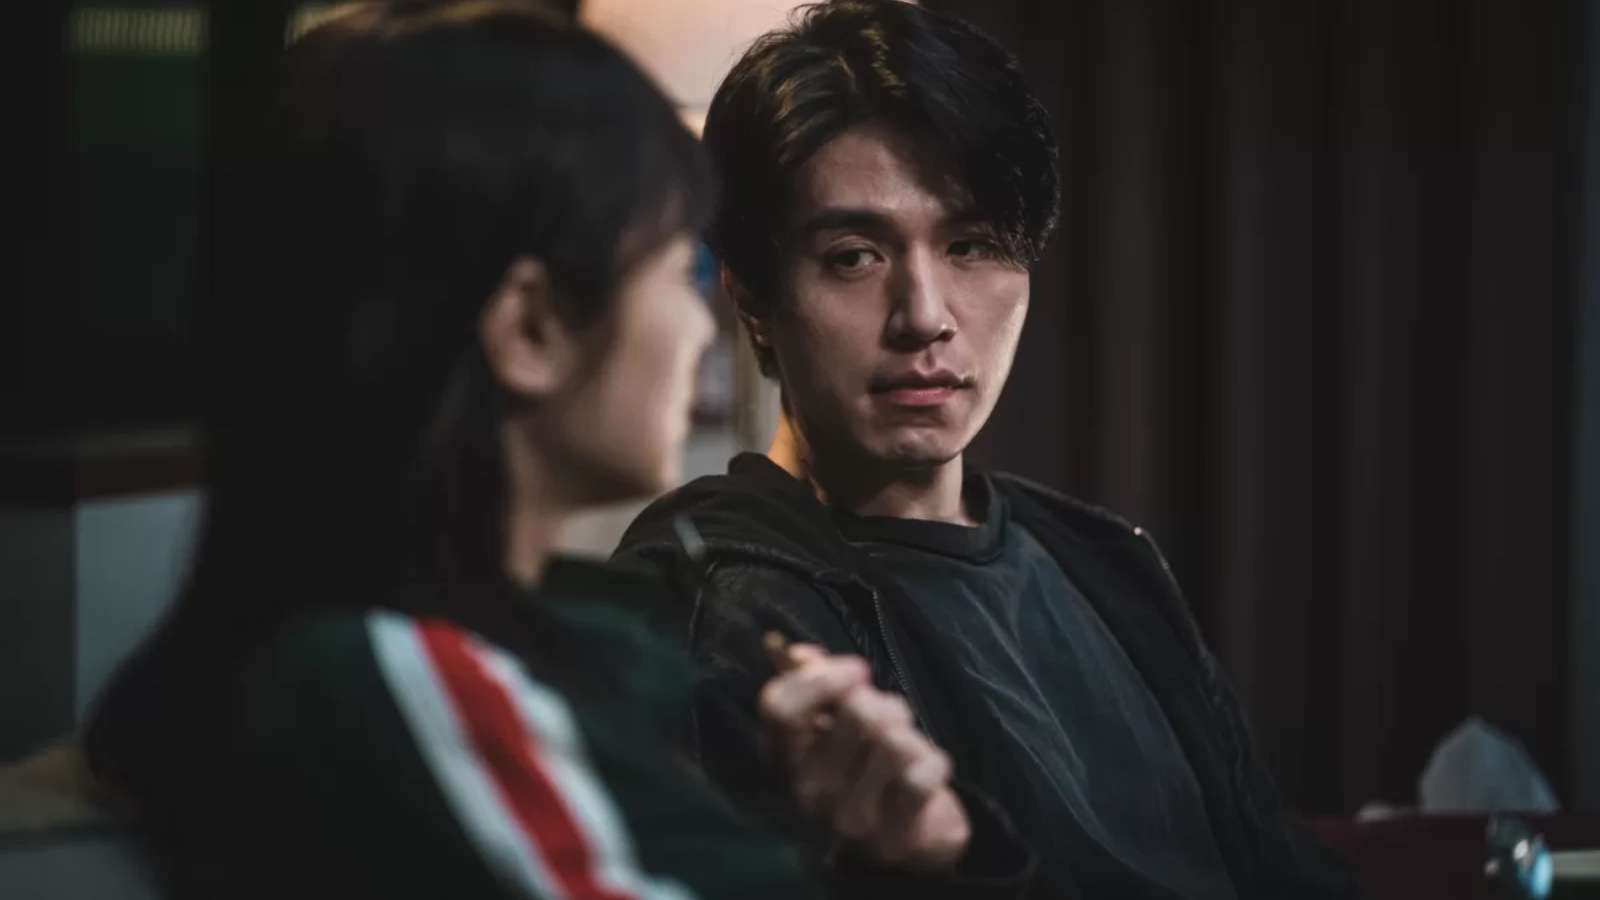 Lee Dong-wook in A Shop For Killers as Jin-man.